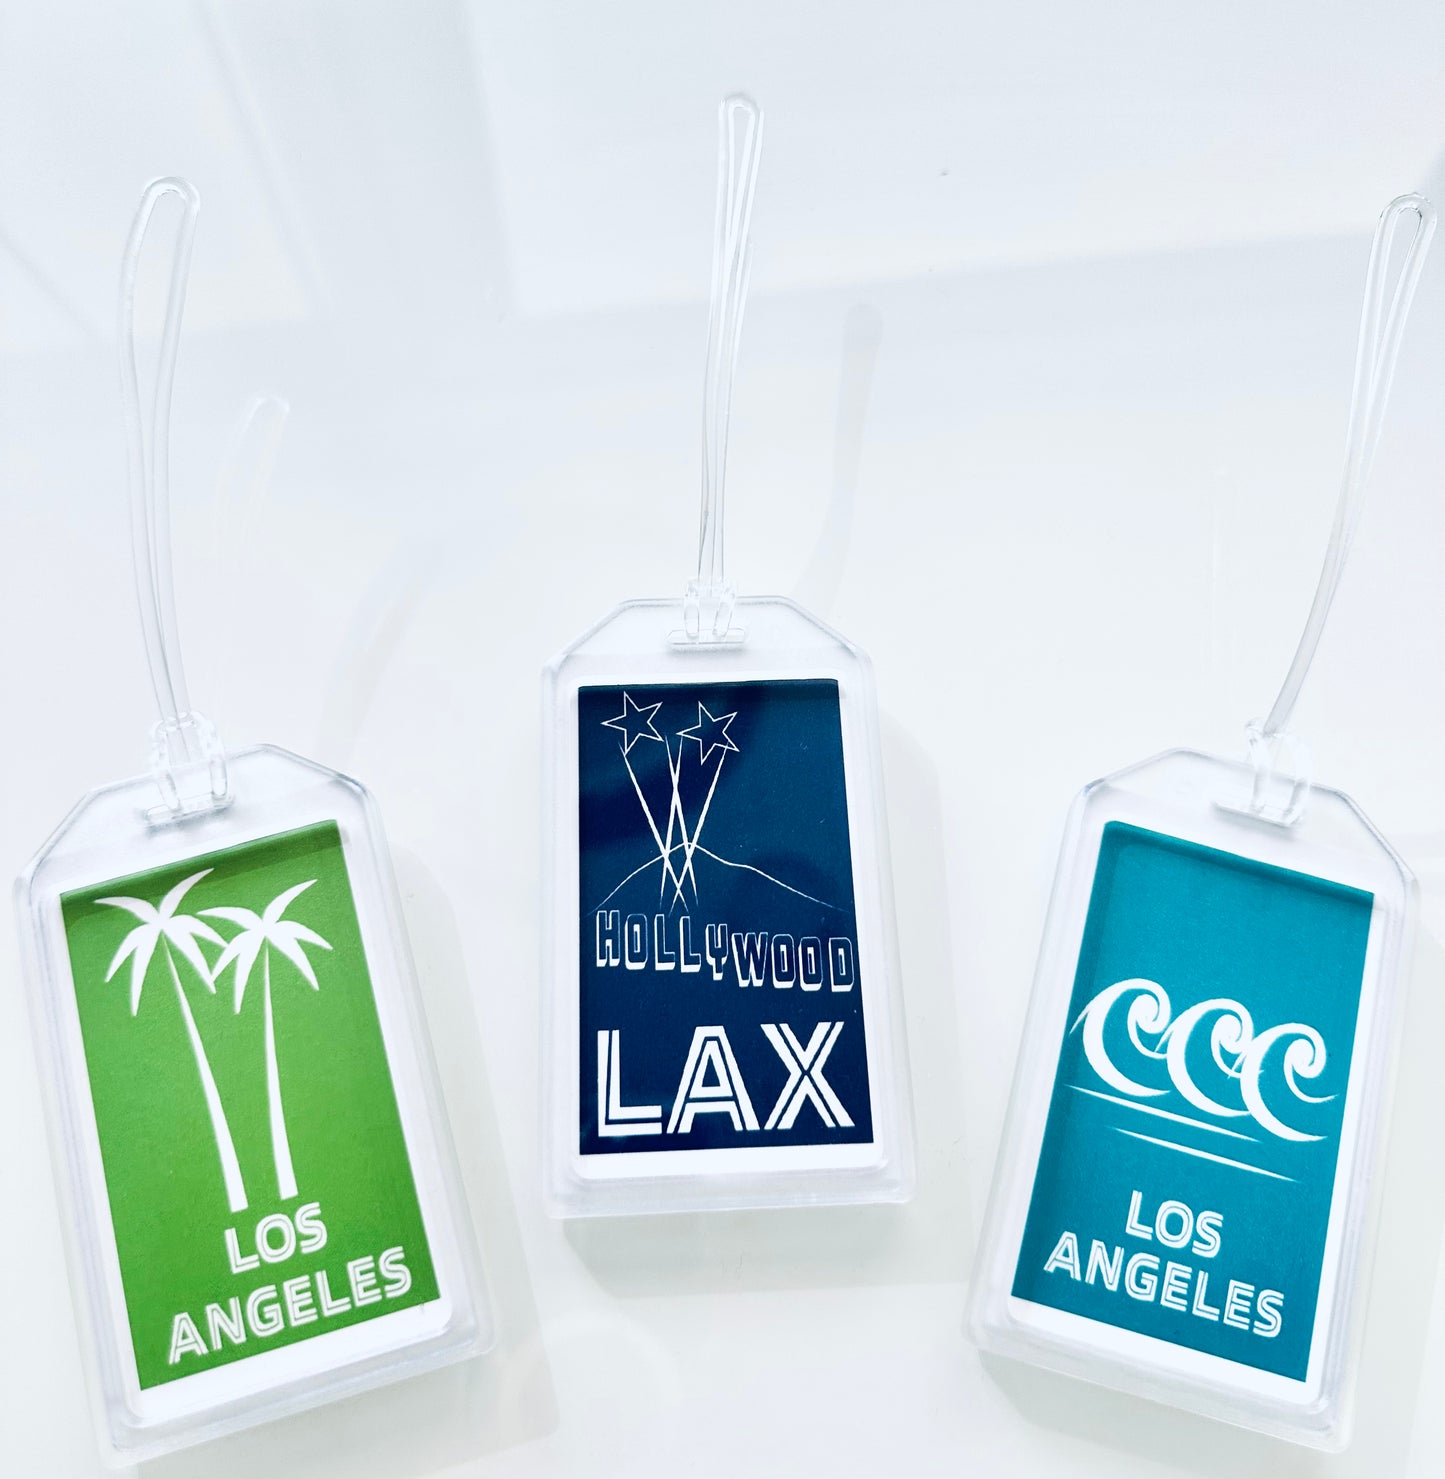 CALIFORNIA CITIES  Luggage & Travel Bag Tags LOS ANGELES/LAX